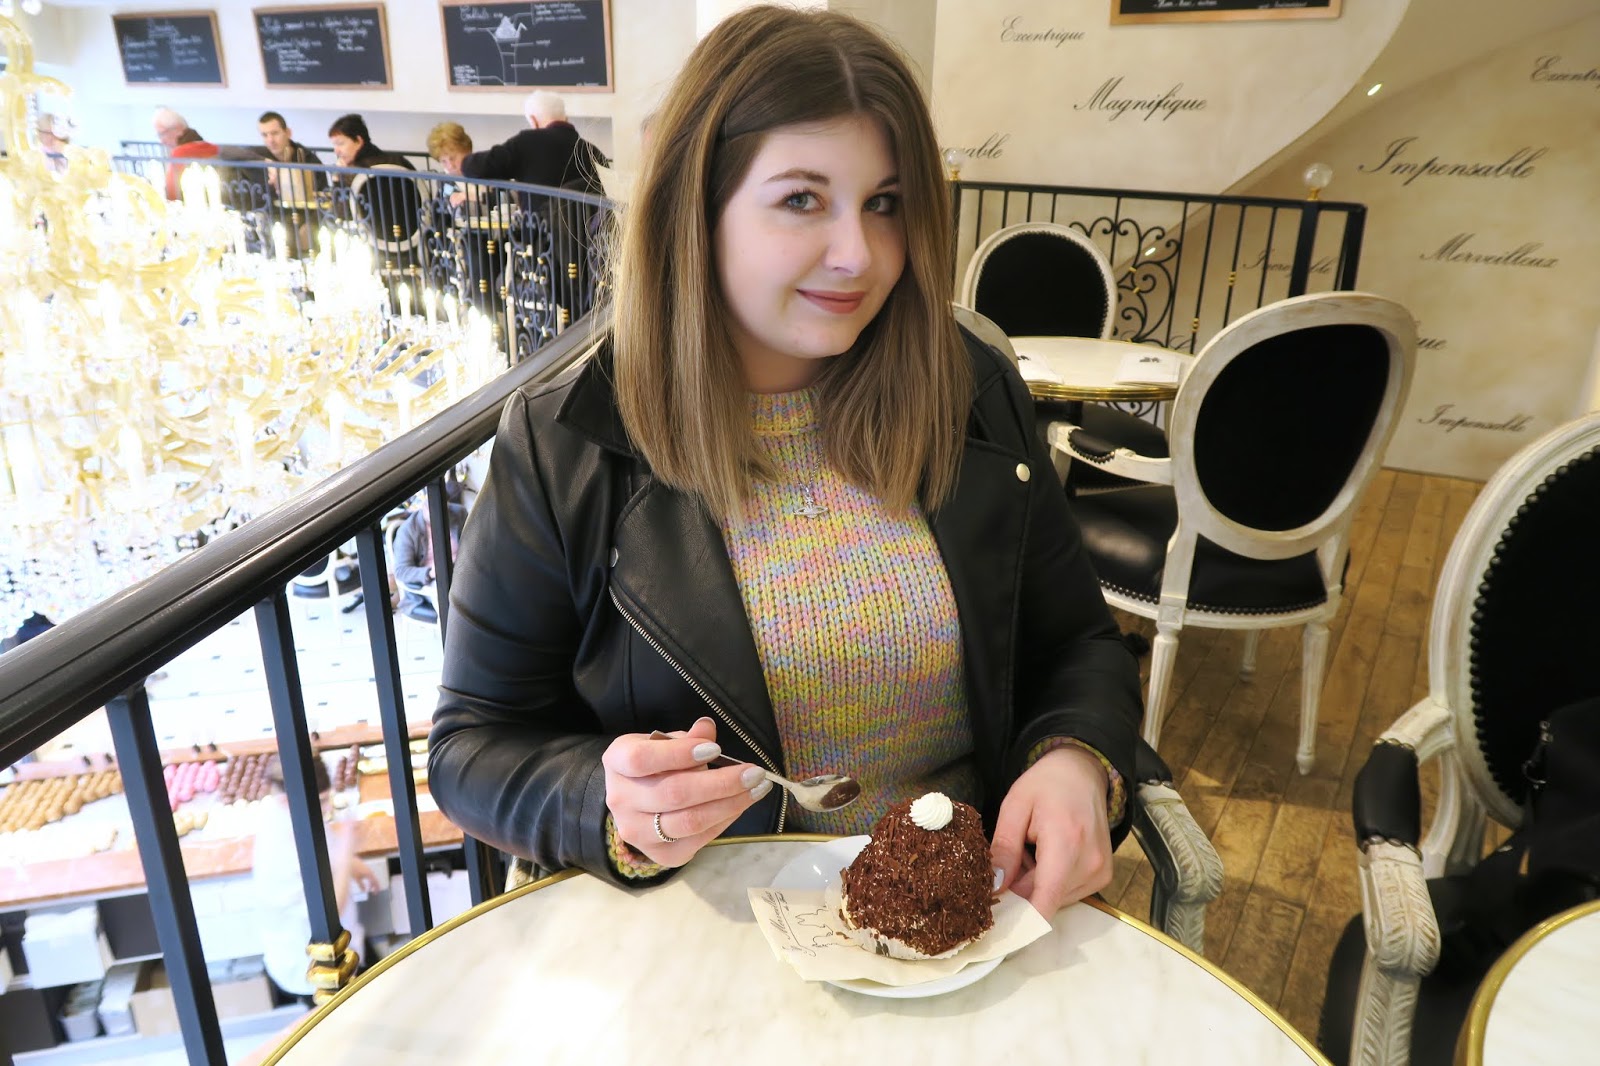 Posing with a Chocolate covered merveilleux cake in Bruges